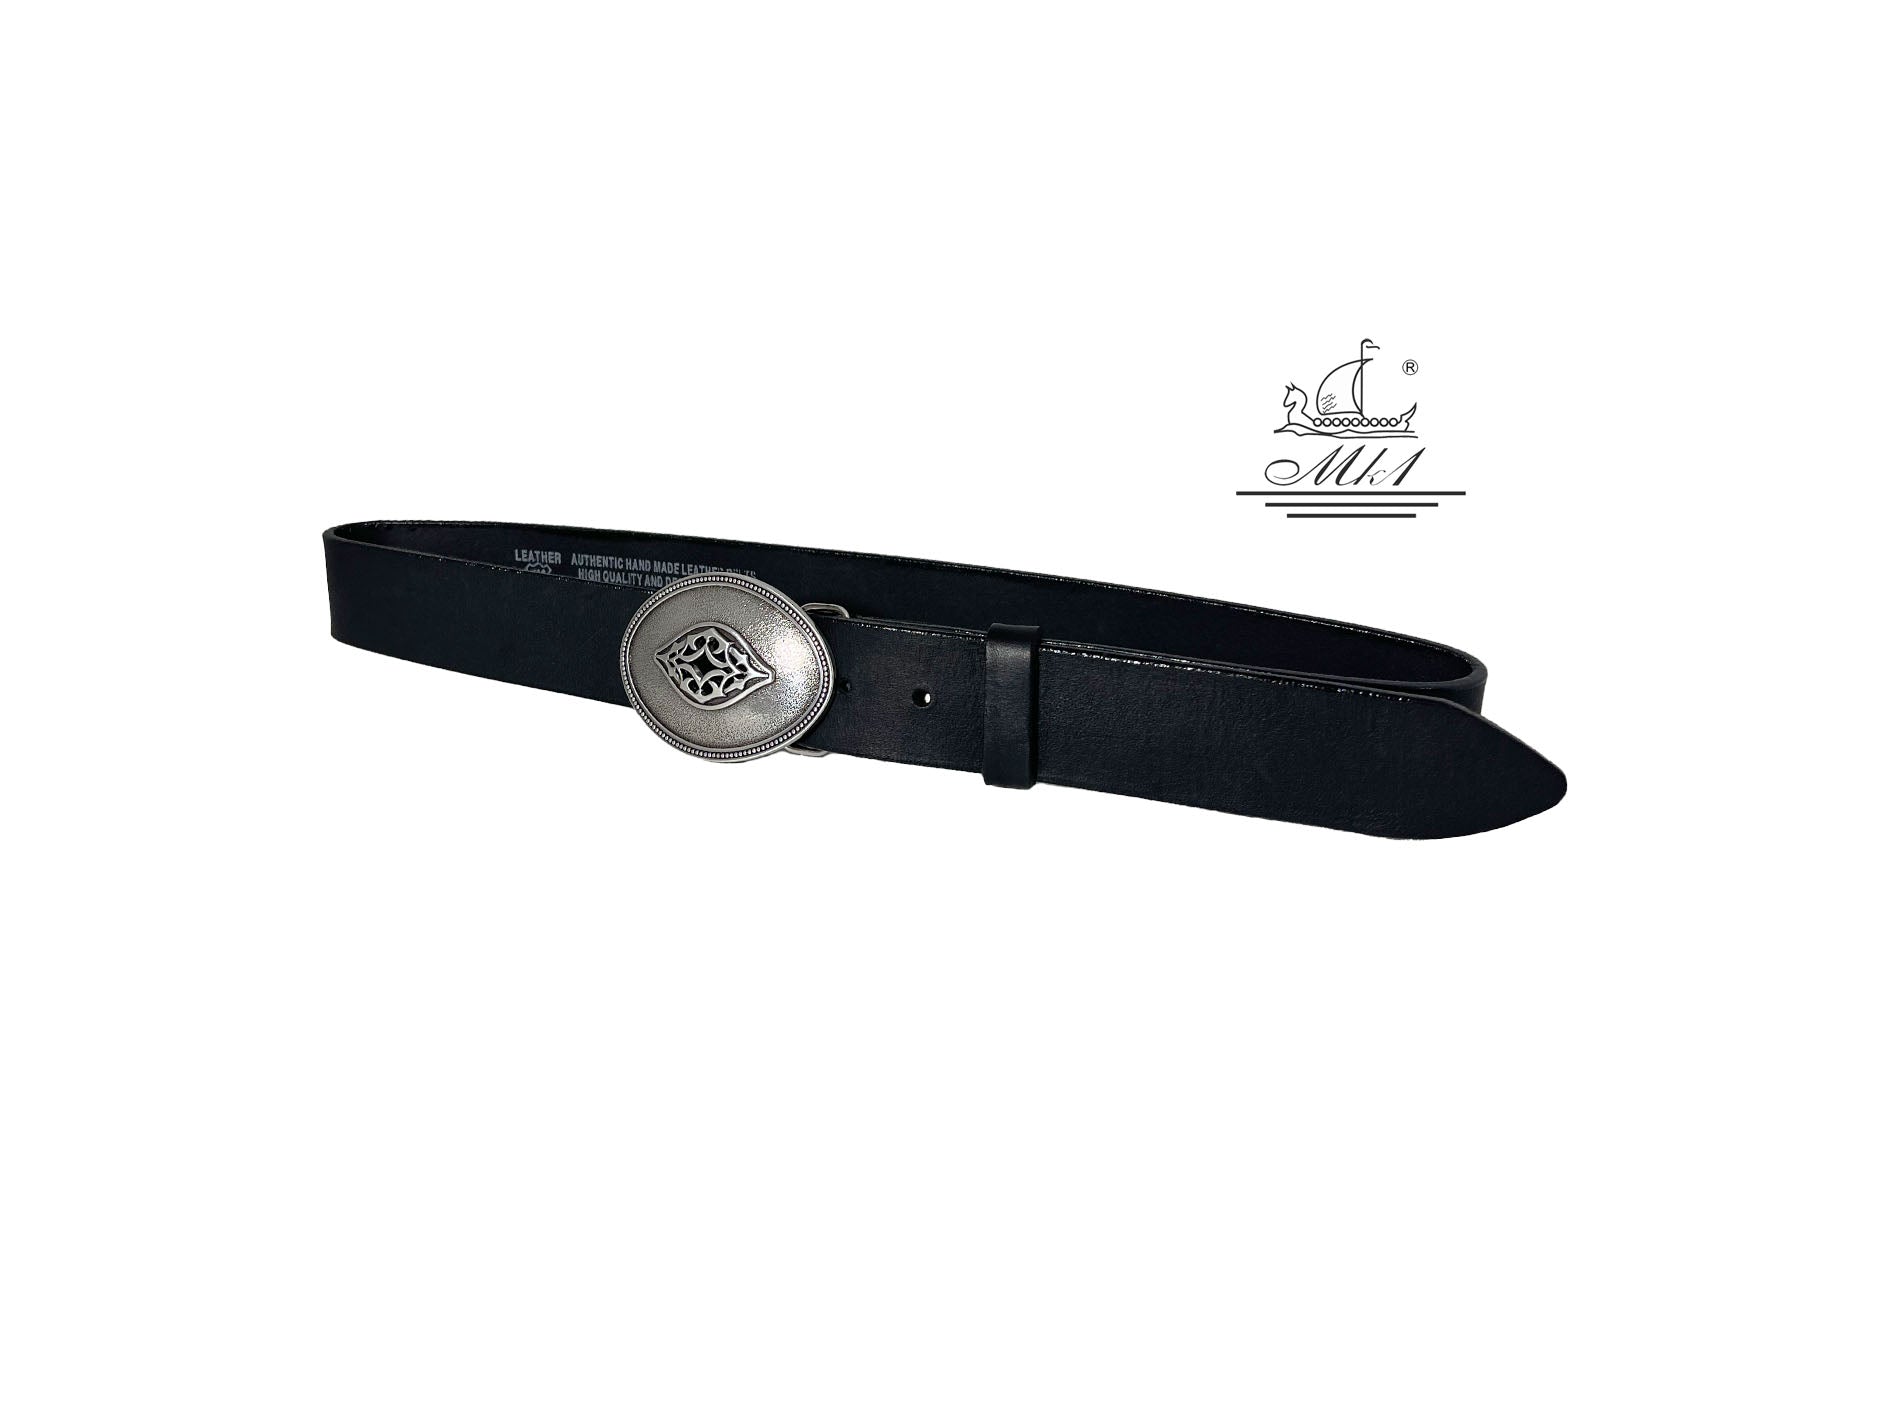 Unisex 4cm wide belt handcrafted from black leather. OV1/40B